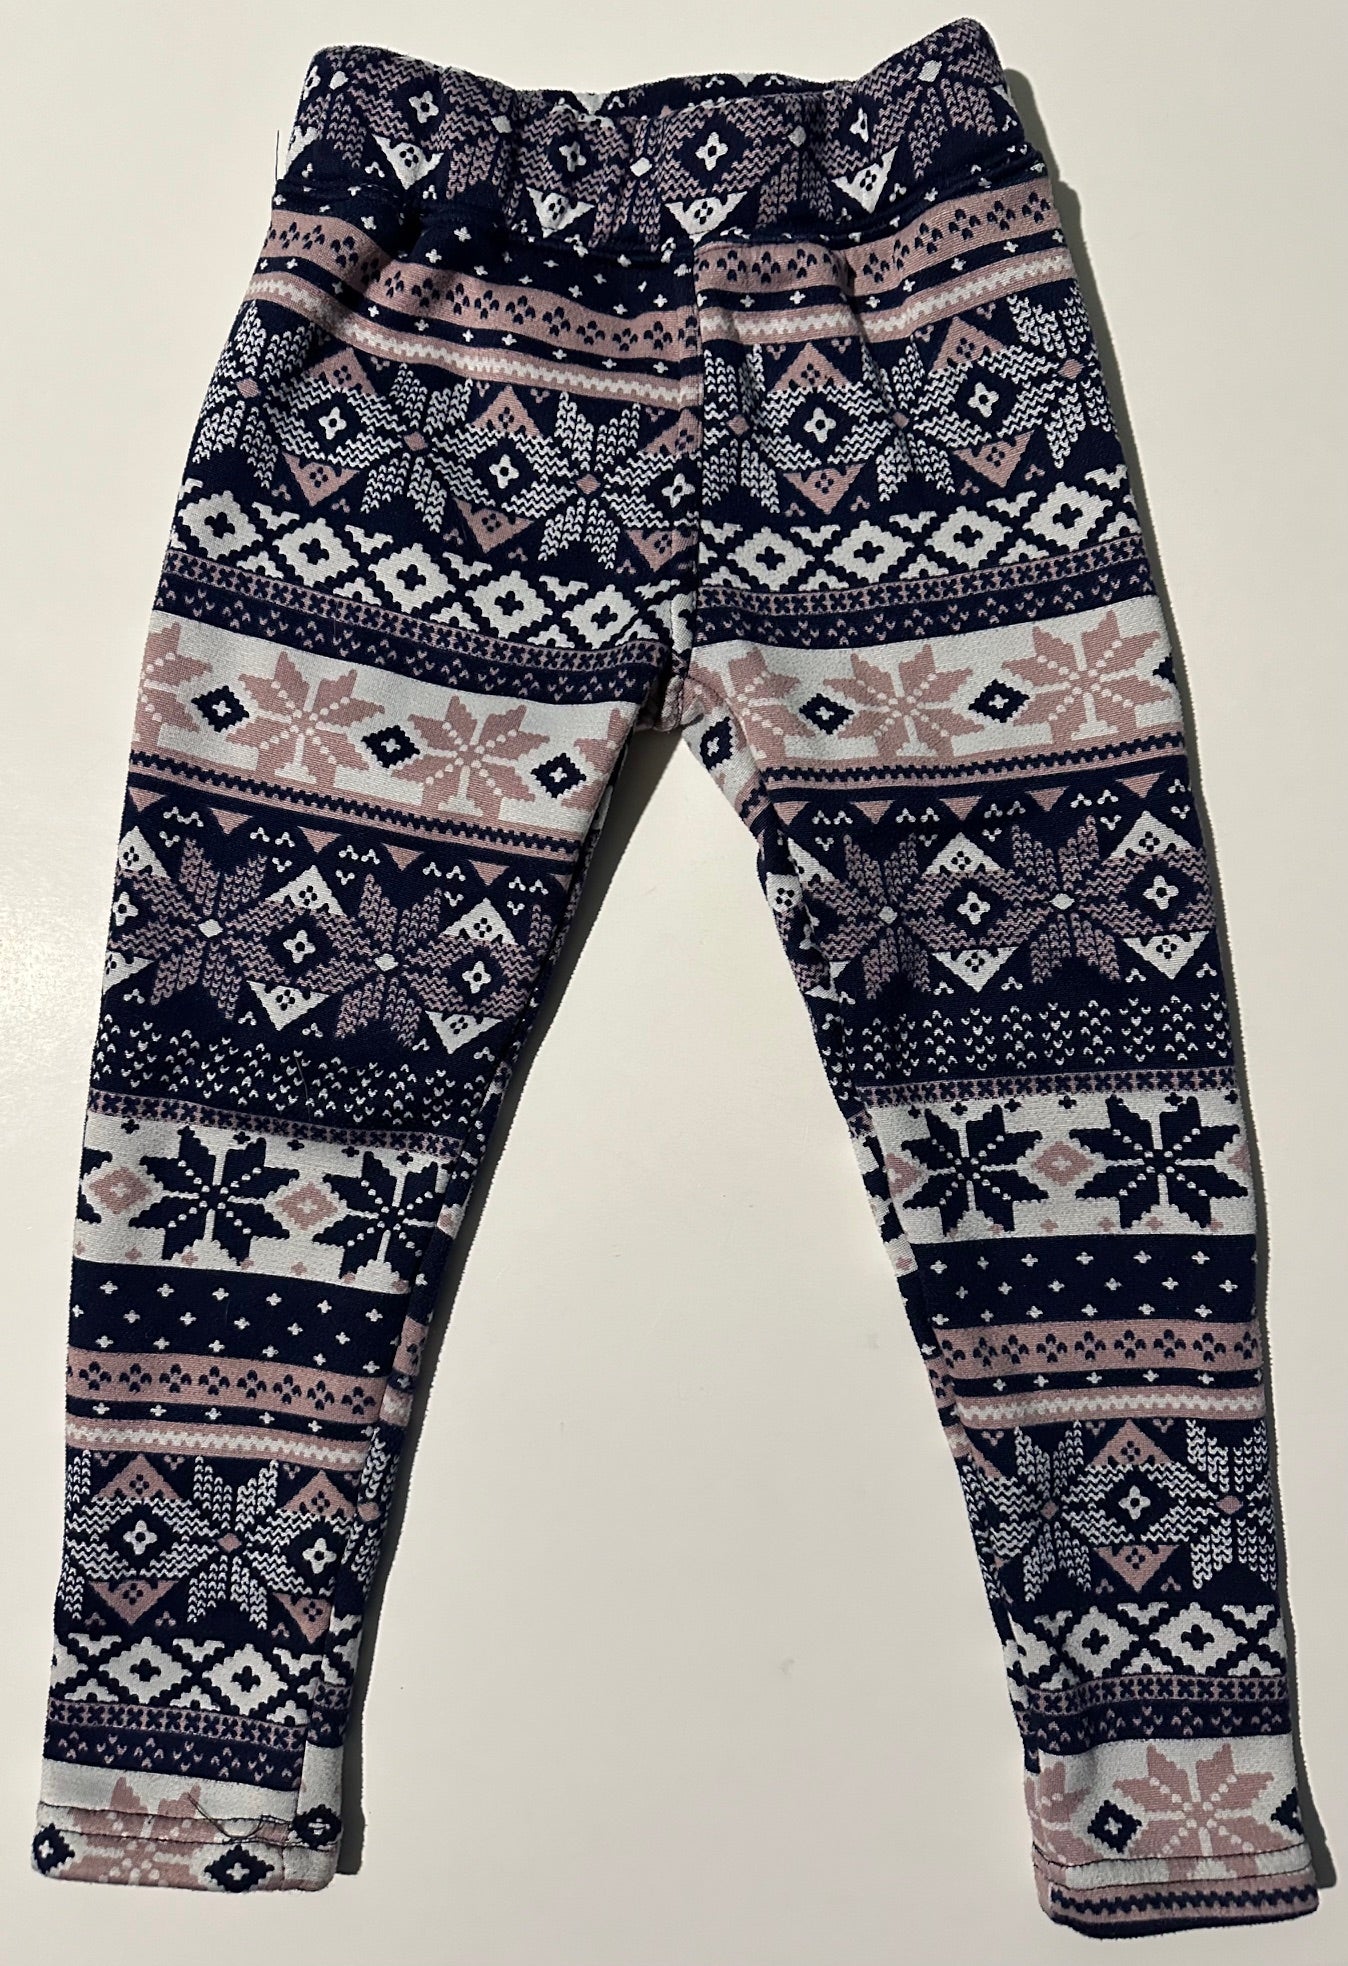 Play* Shosho, Patterned Leggings with Soft Lining - Size 4/5